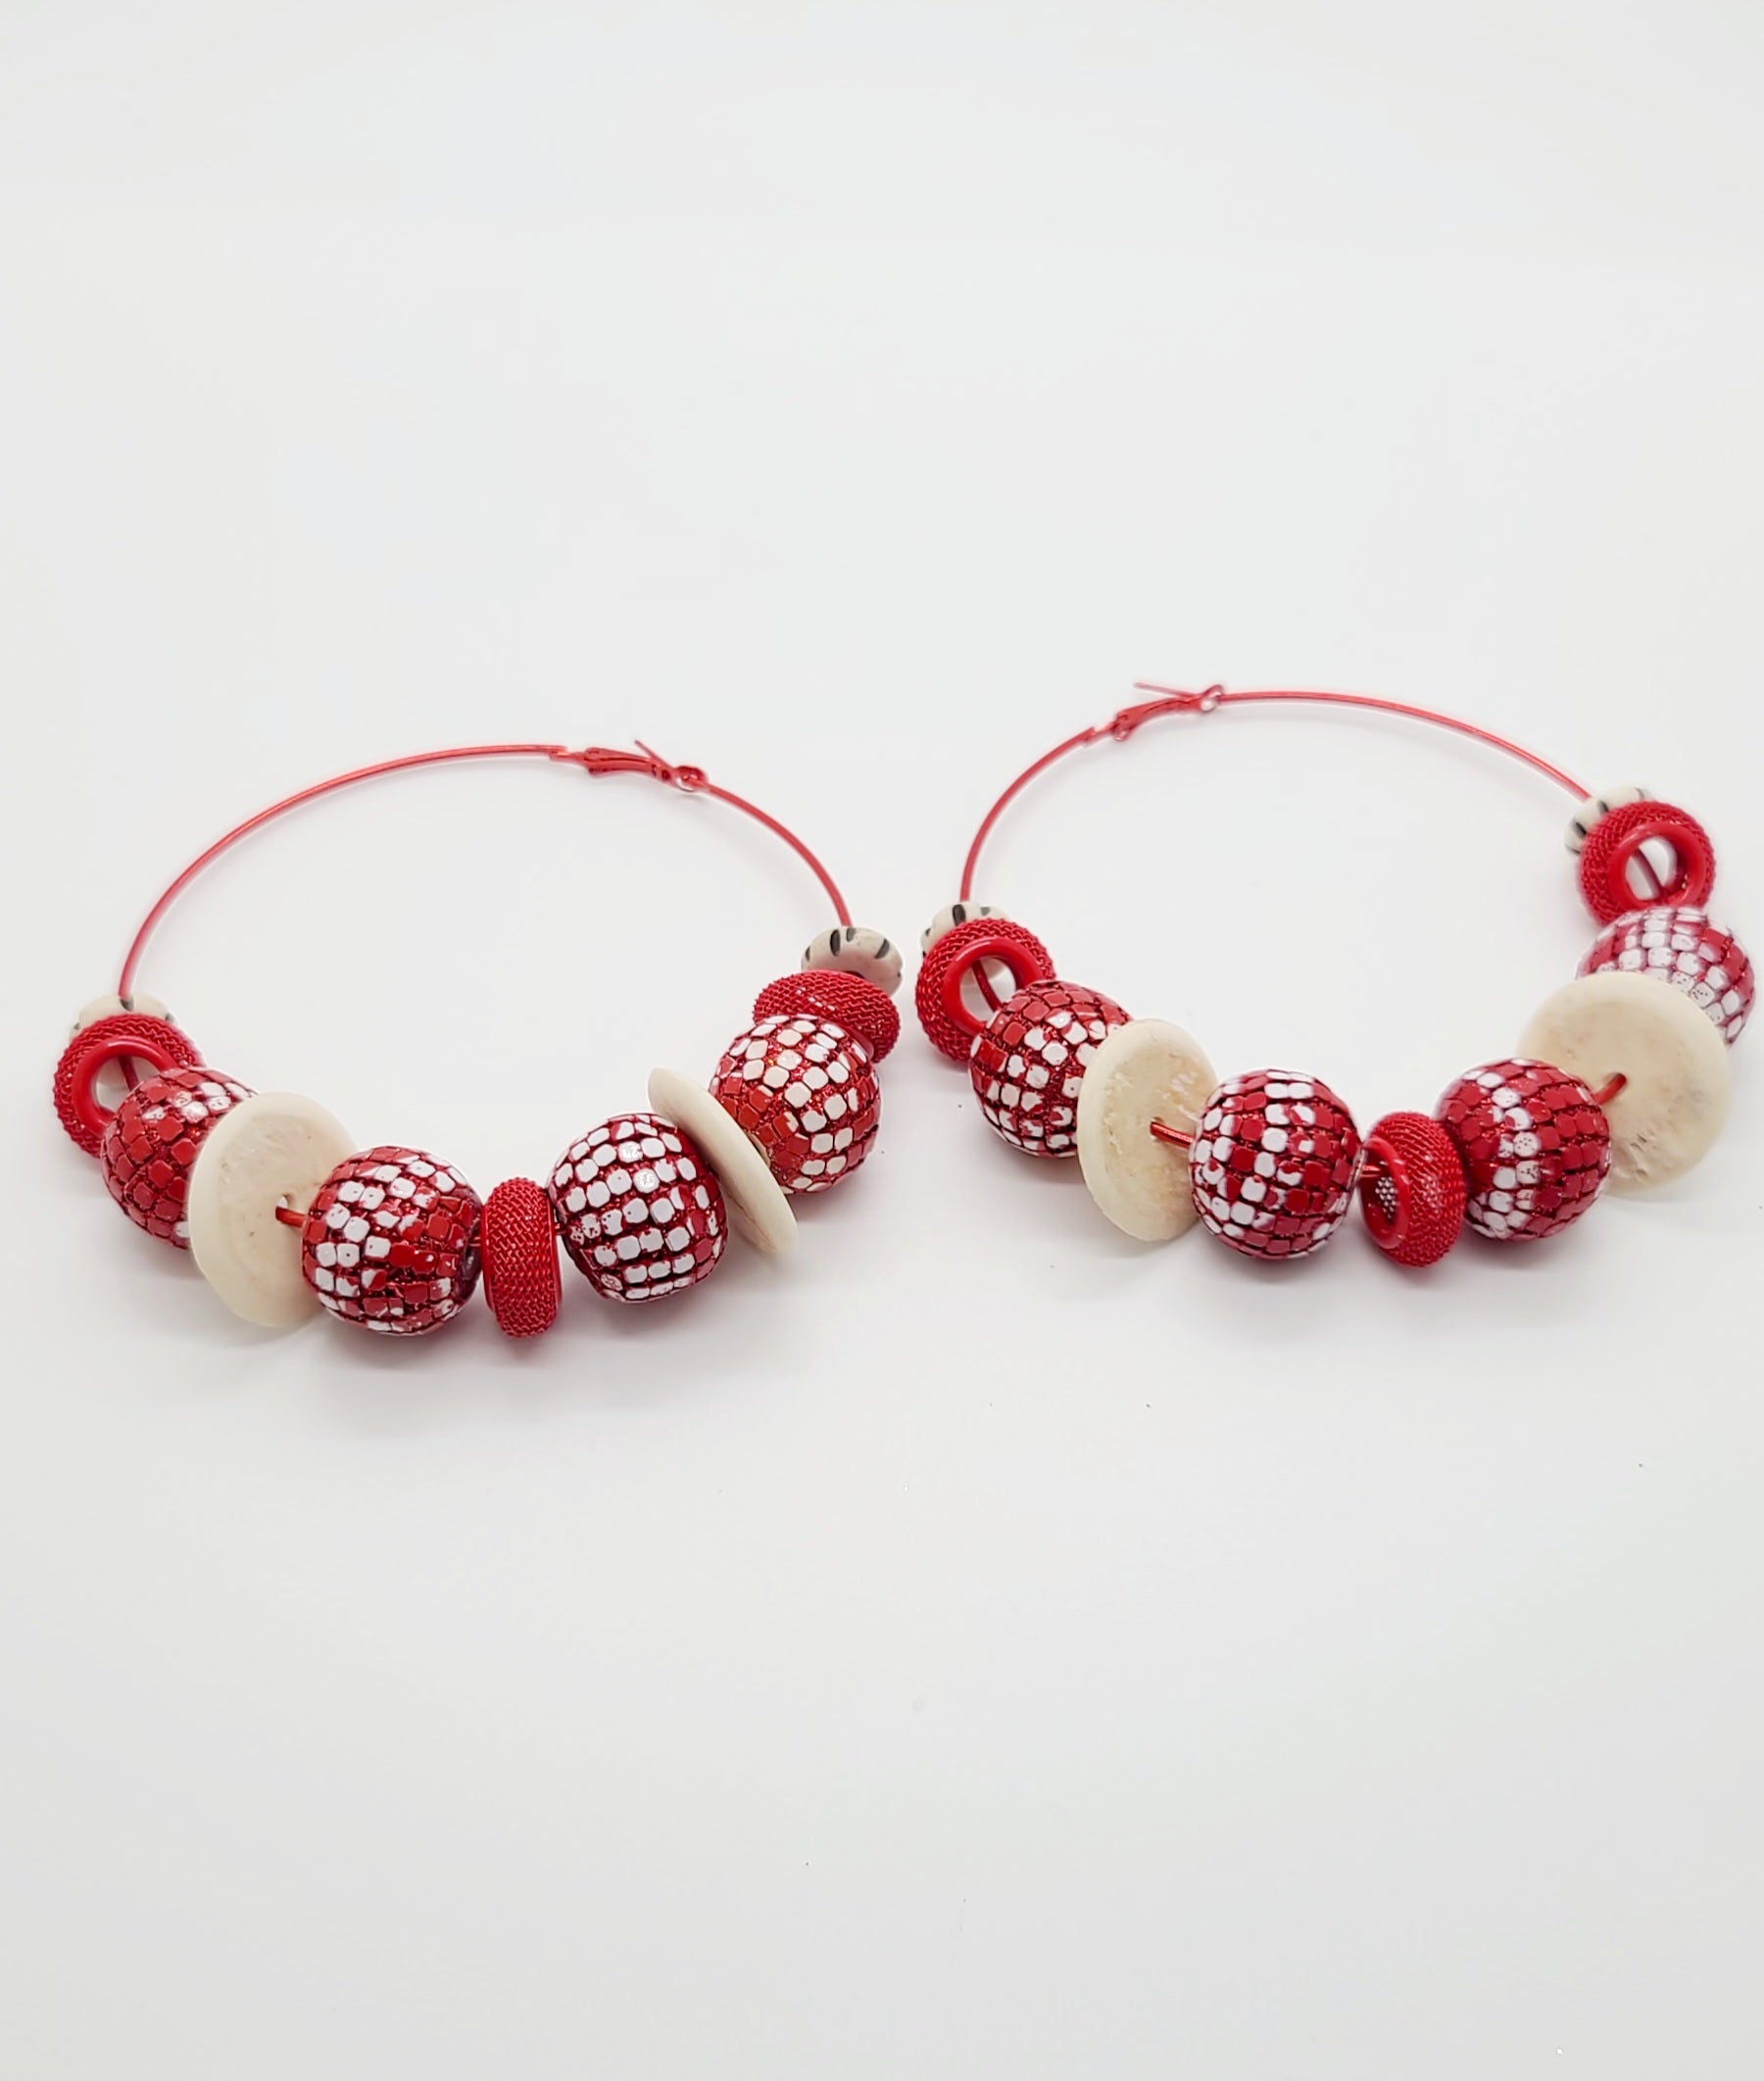 Length: 3.5x3.5 inches | Weight: 2.4 ounces  Distinctly You! These earrings are made with large red hoops,15mm red sequin beads, 15mm Batik bone disc, red mesh rondelles, and 10mm black and white Batik bone rondelles.